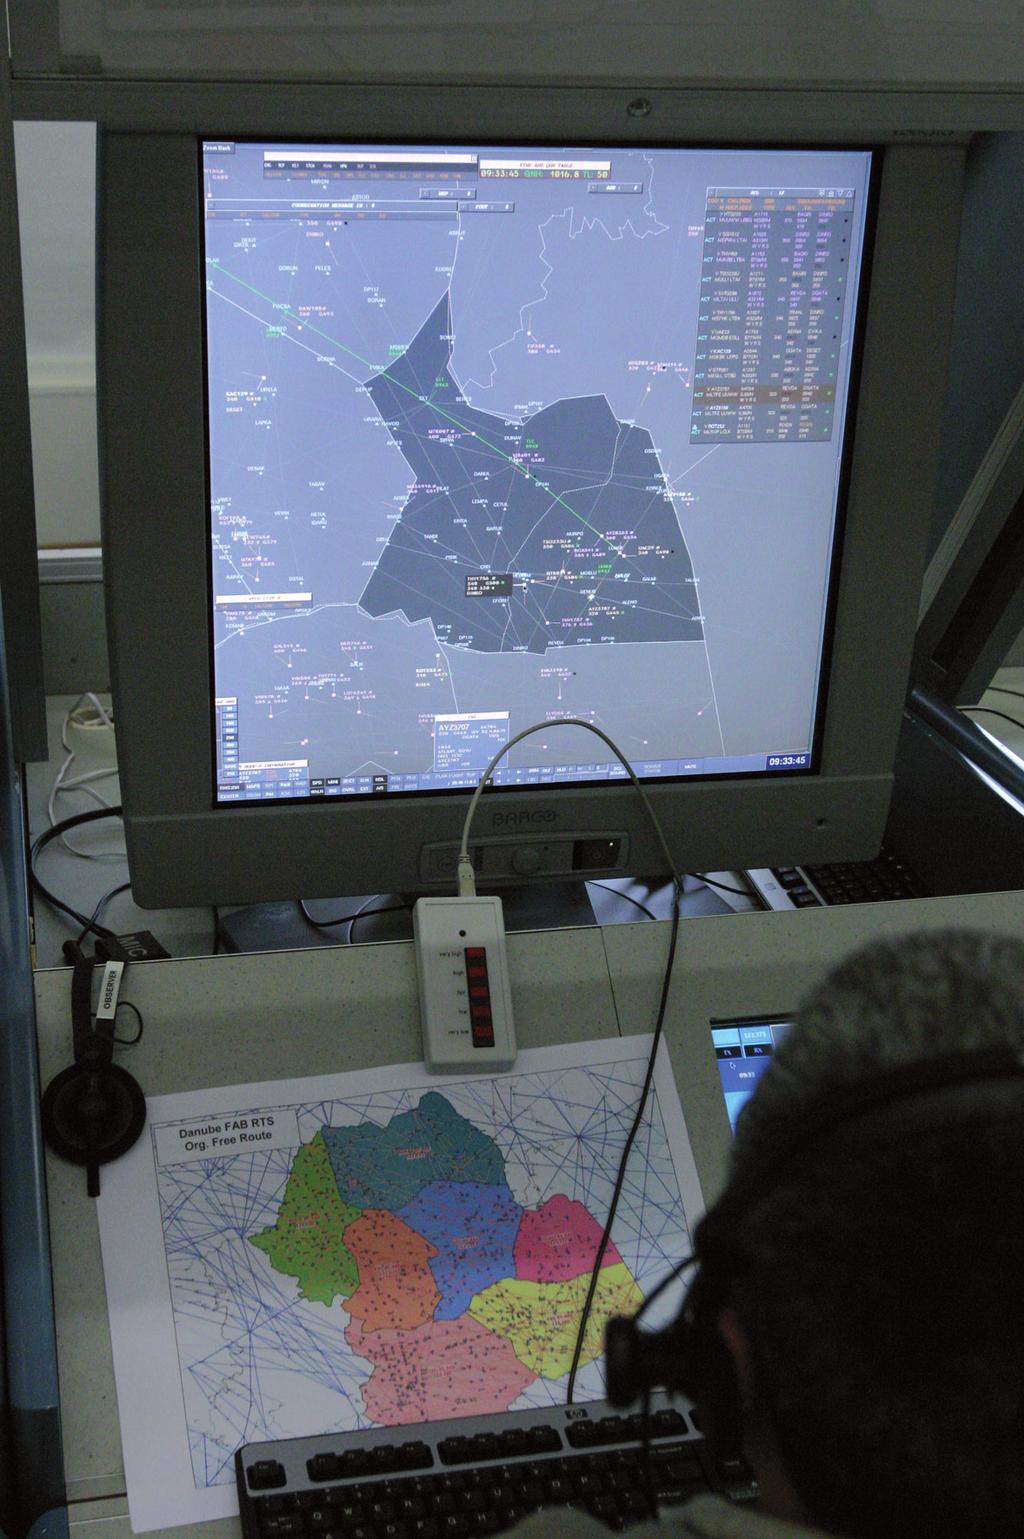 Simulation objectives The preparatory work showed that the central objective of the Danube FAB project should be to improve the flight efficiency in the Danube FAB airspace, while maintaining or